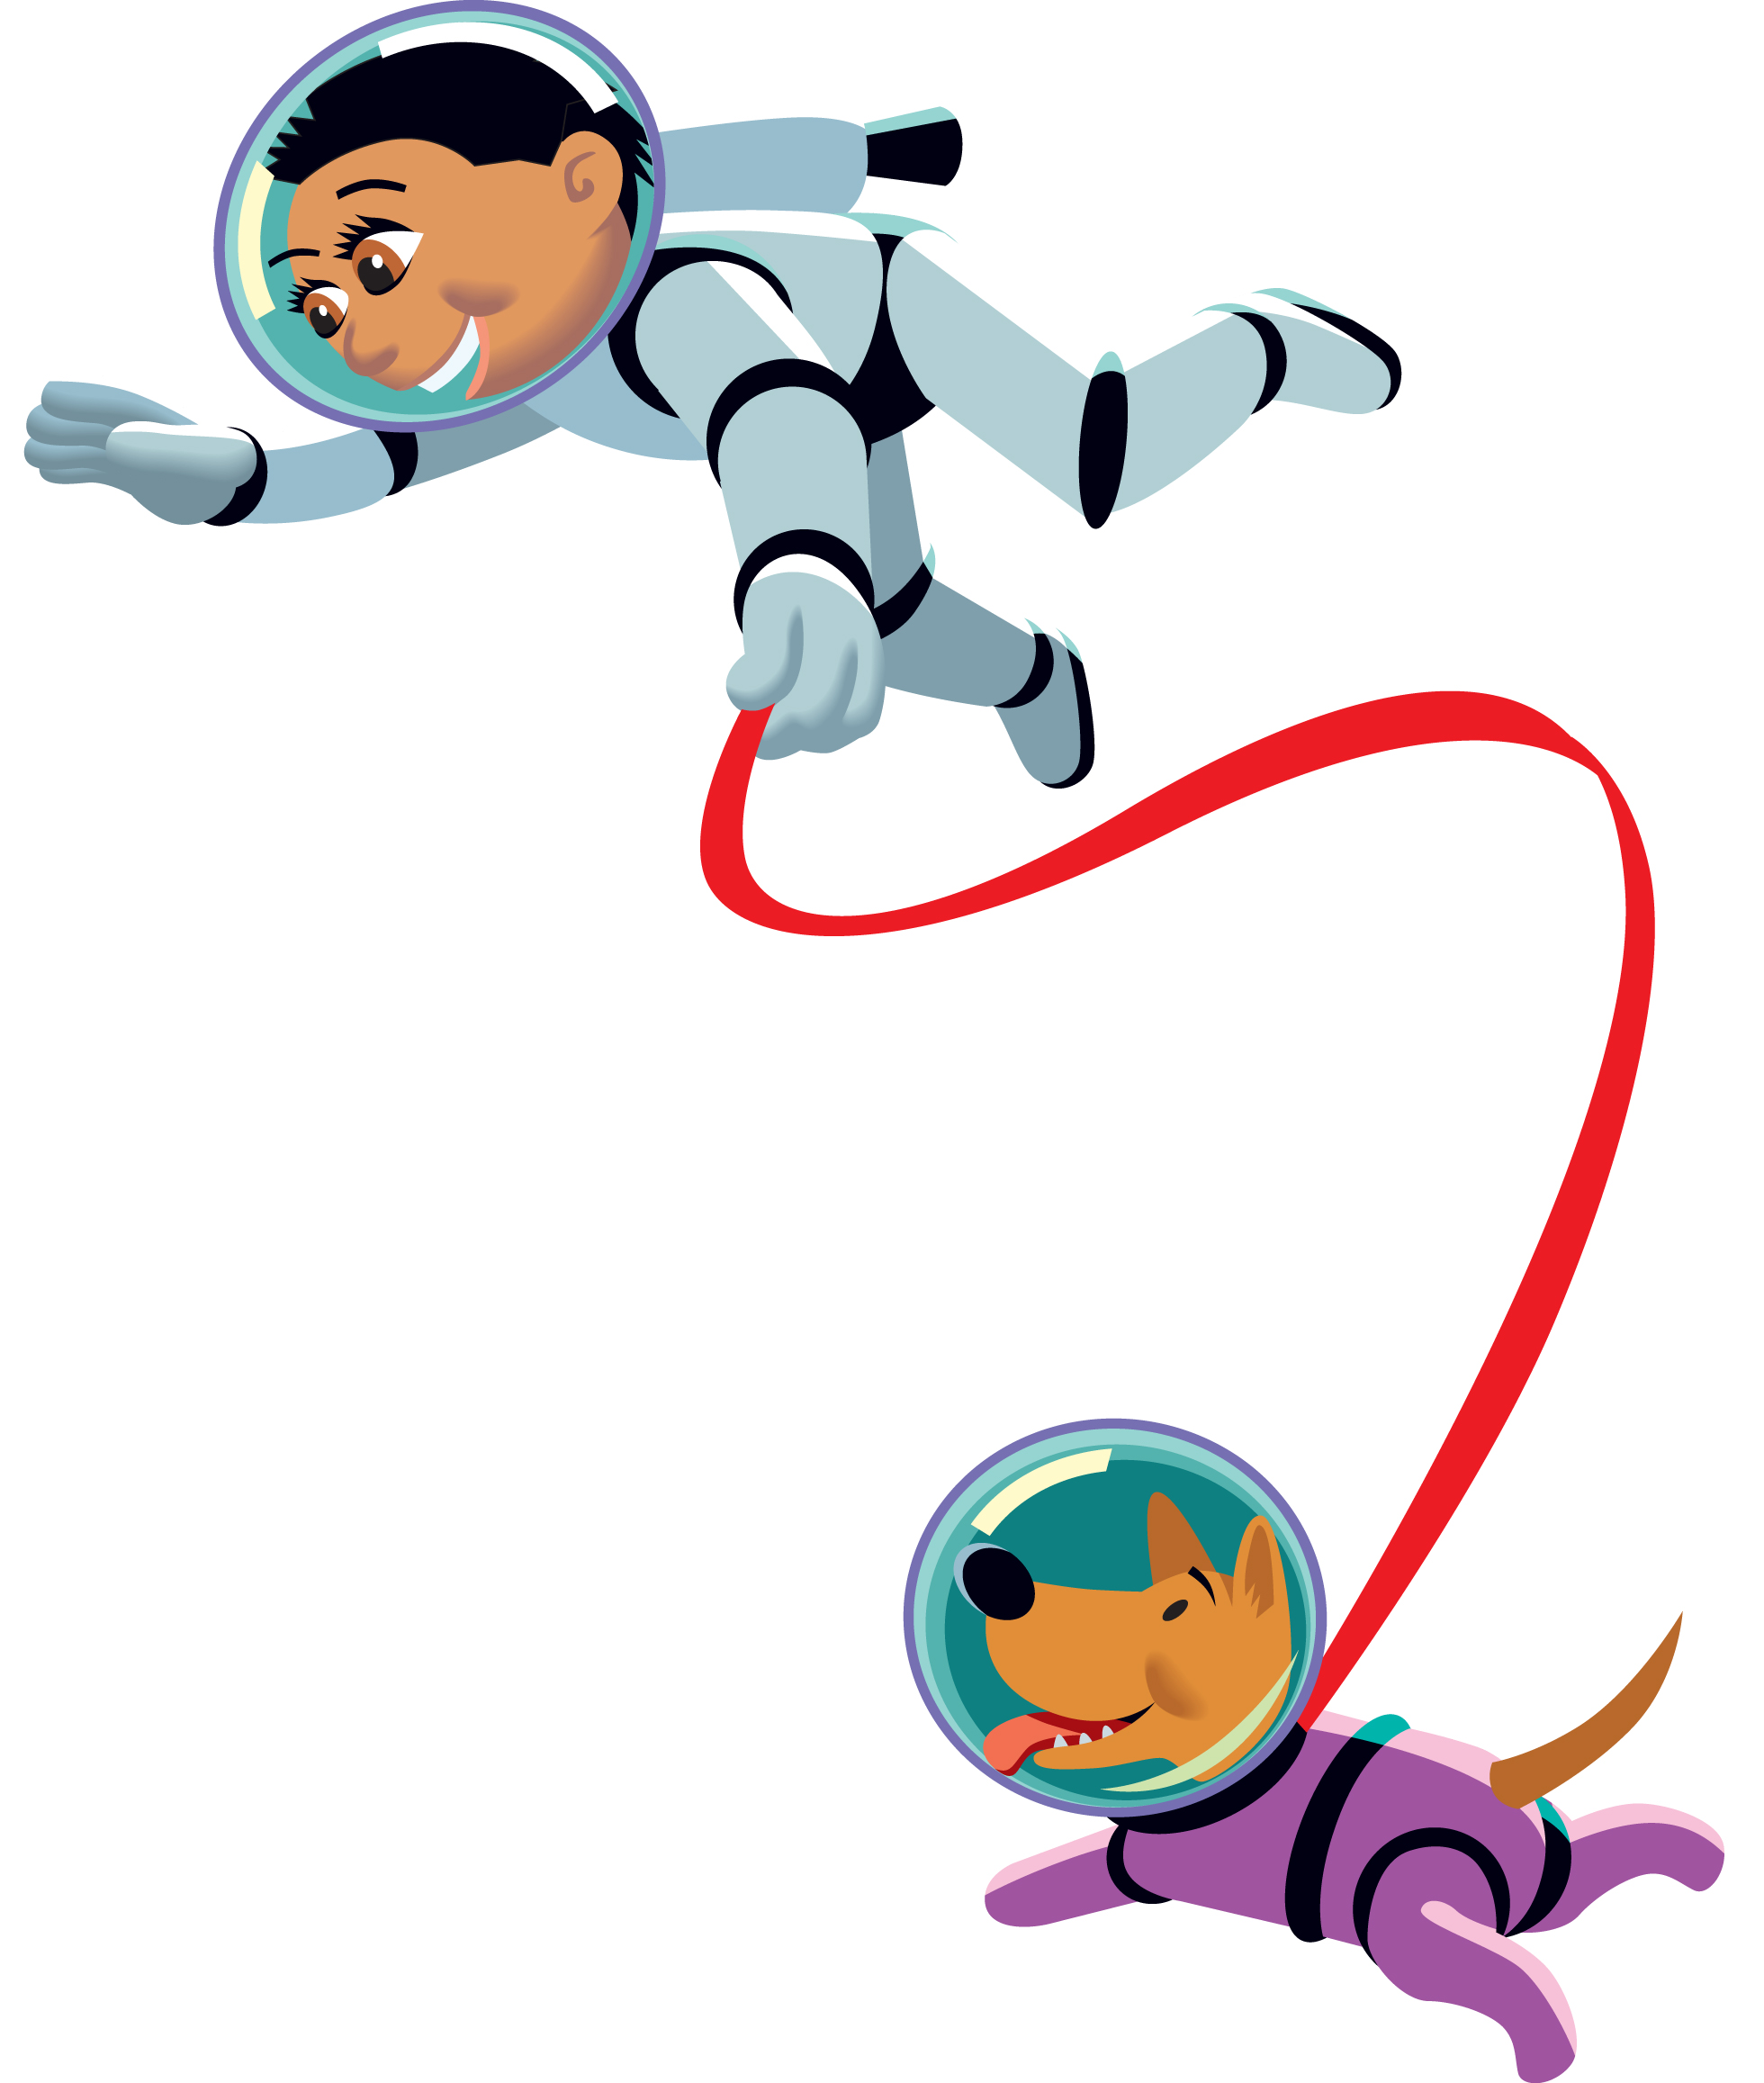 Space clip art for kids